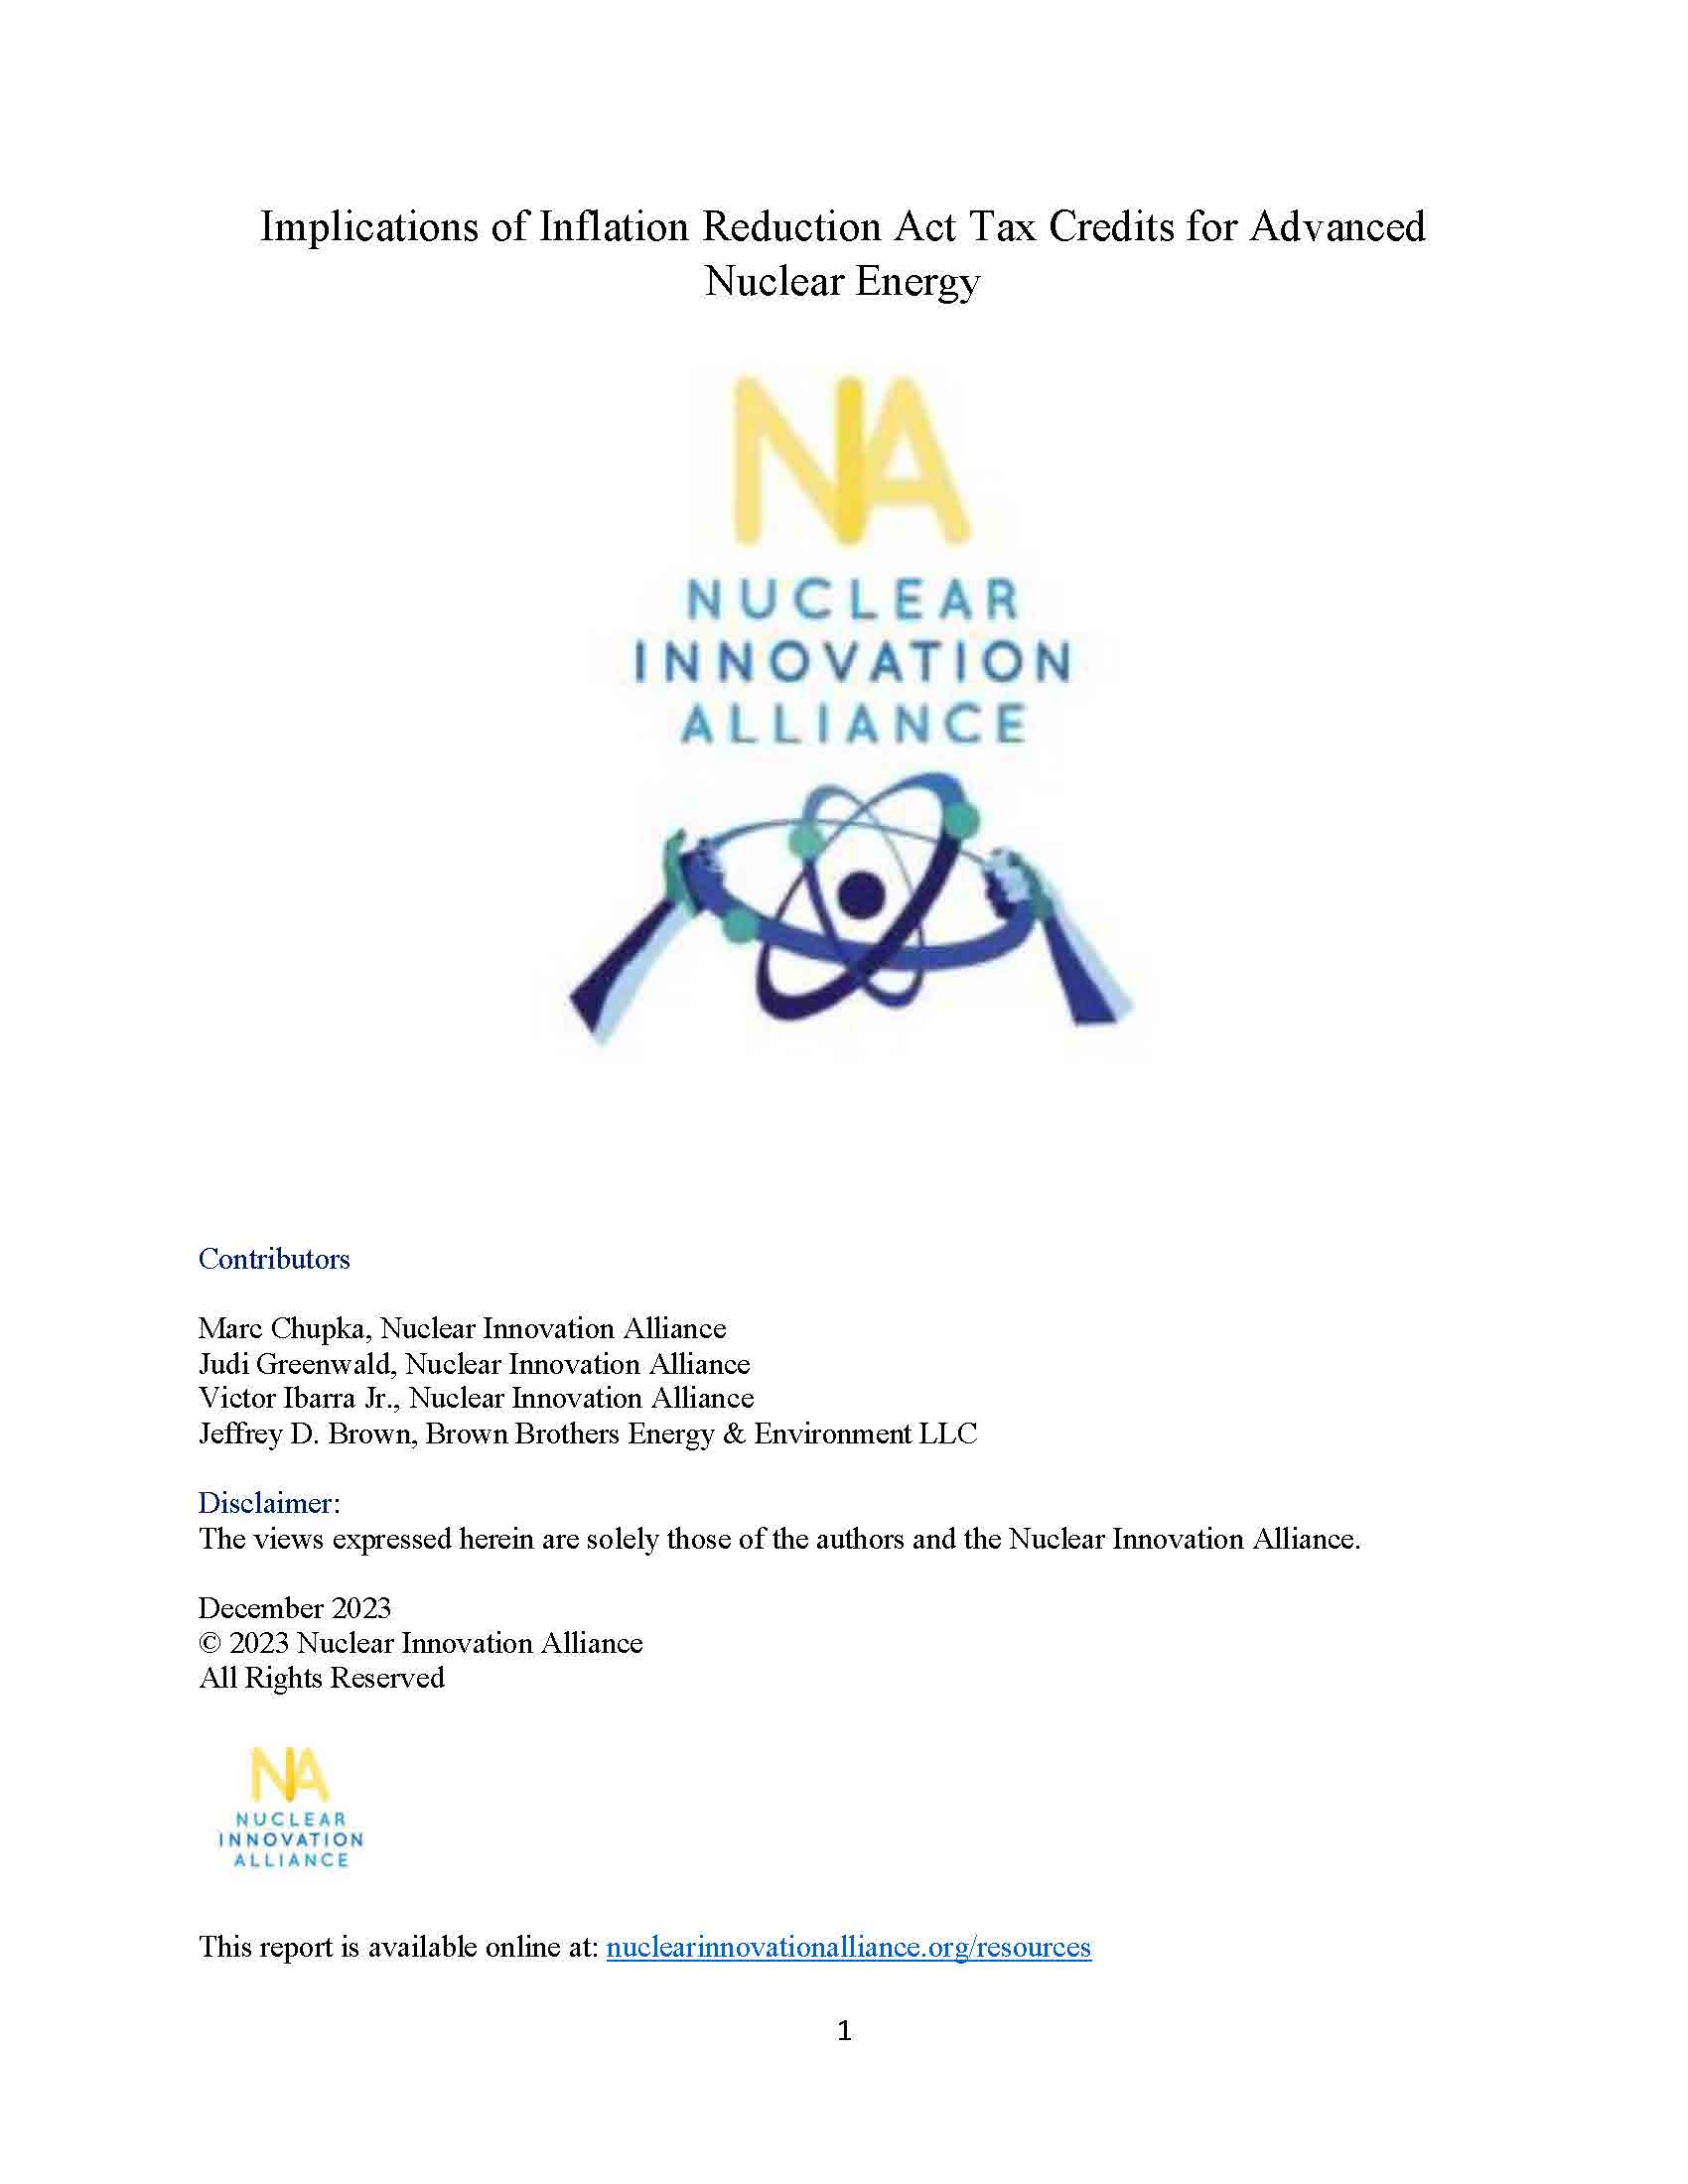 Implications of Inflation Reduction Act Tax Credits for Advanced Nuclear Energy